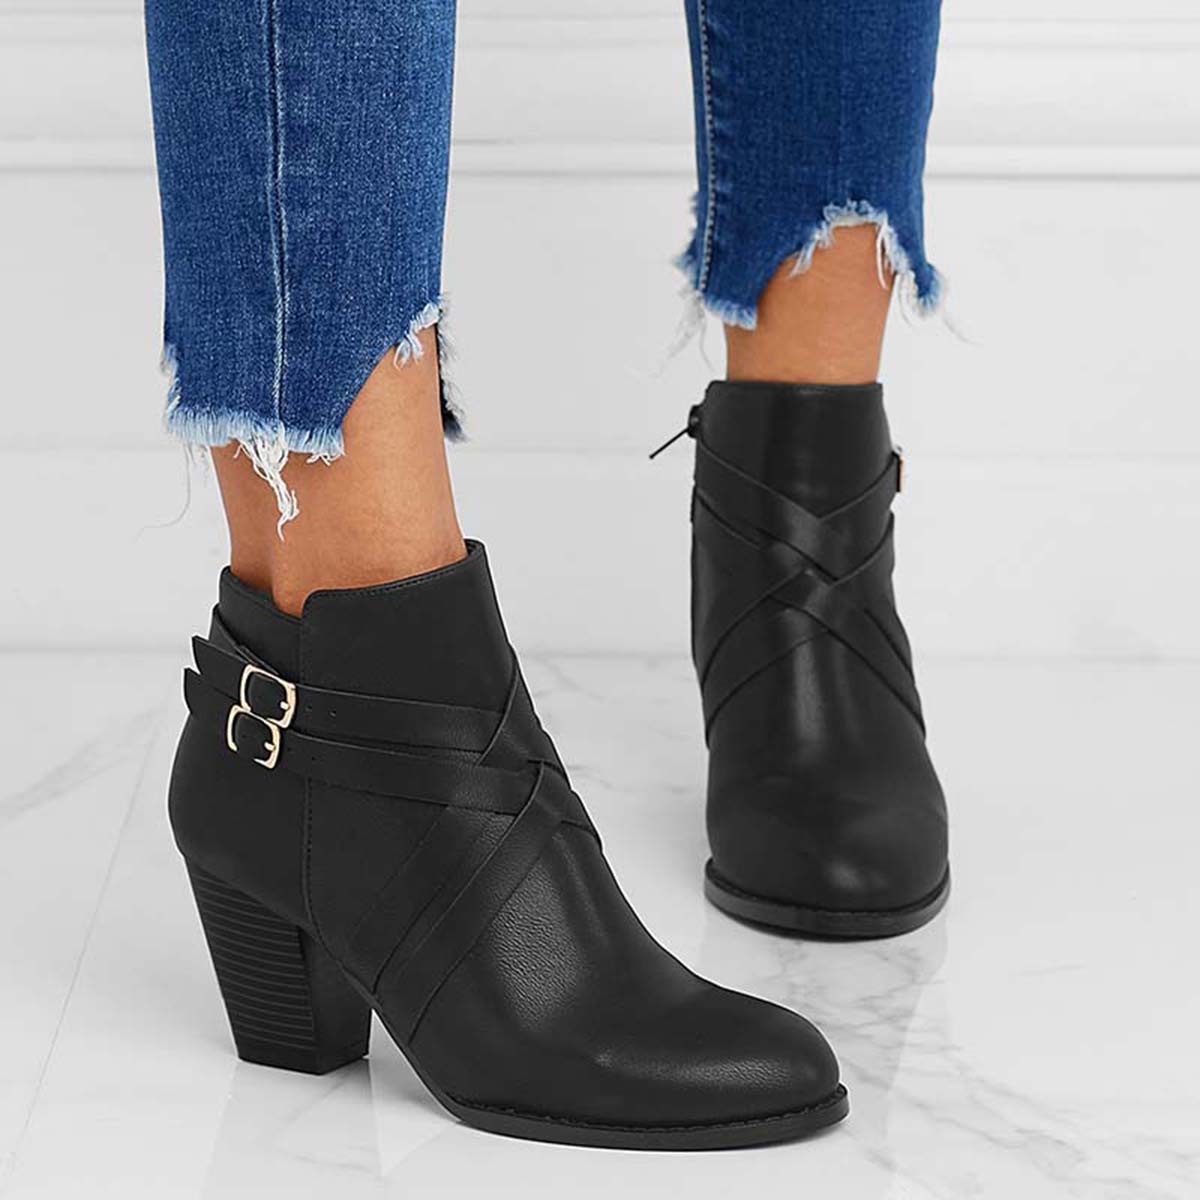 Veooy Crisscross Buckle Chunky Heel Ankle Boots Side Zipper Booties